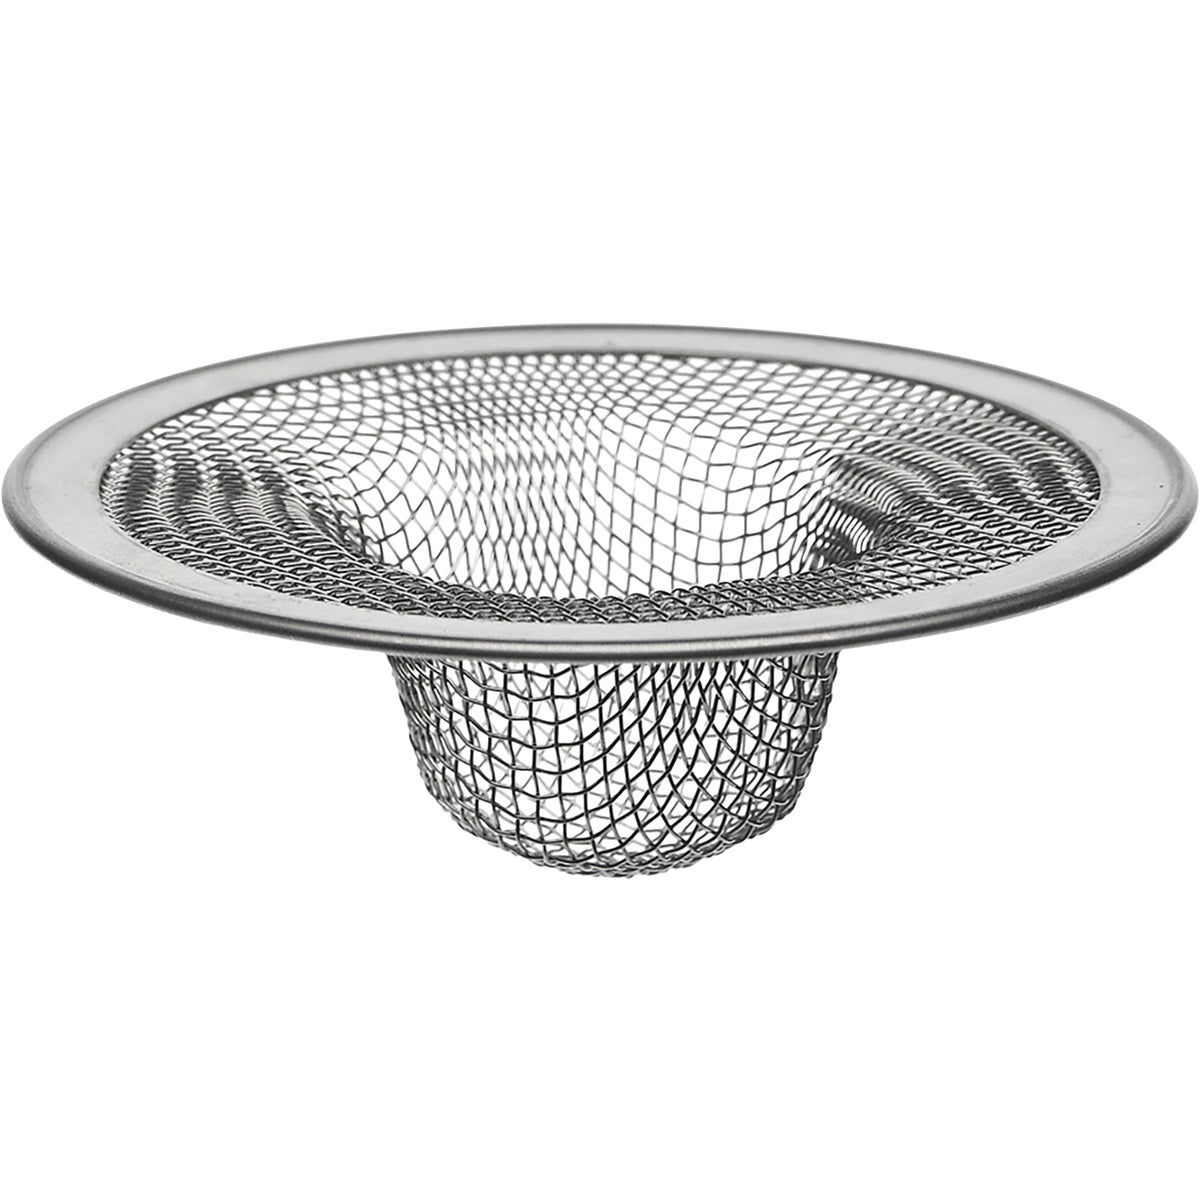 Item 406153, The Danco 4-1/2 Stainless-Steel Kitchen Mesh Strainer helps prevent clogged